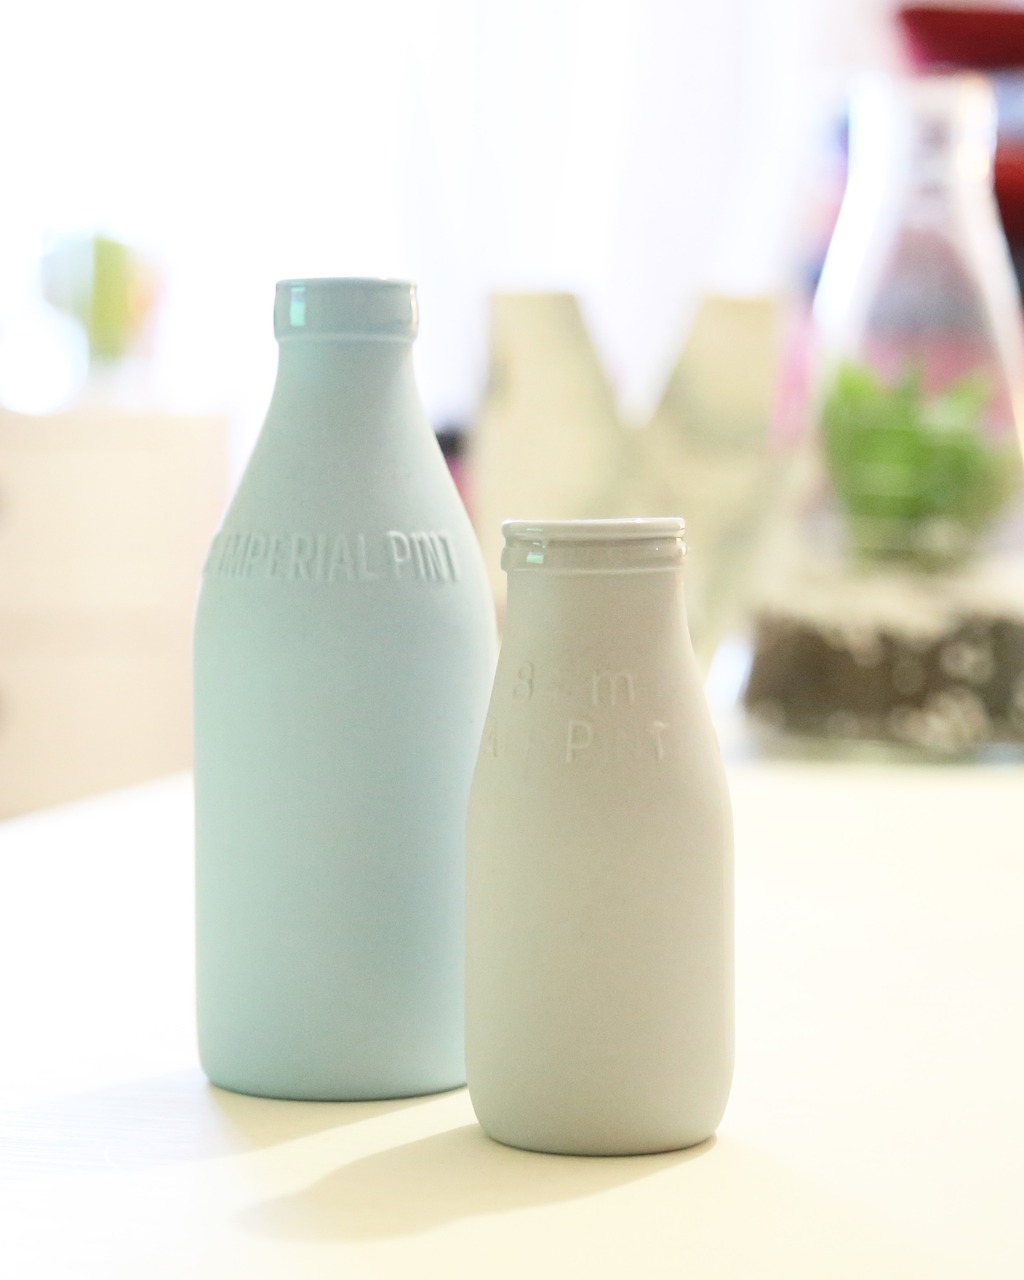 Two dairy bottles.